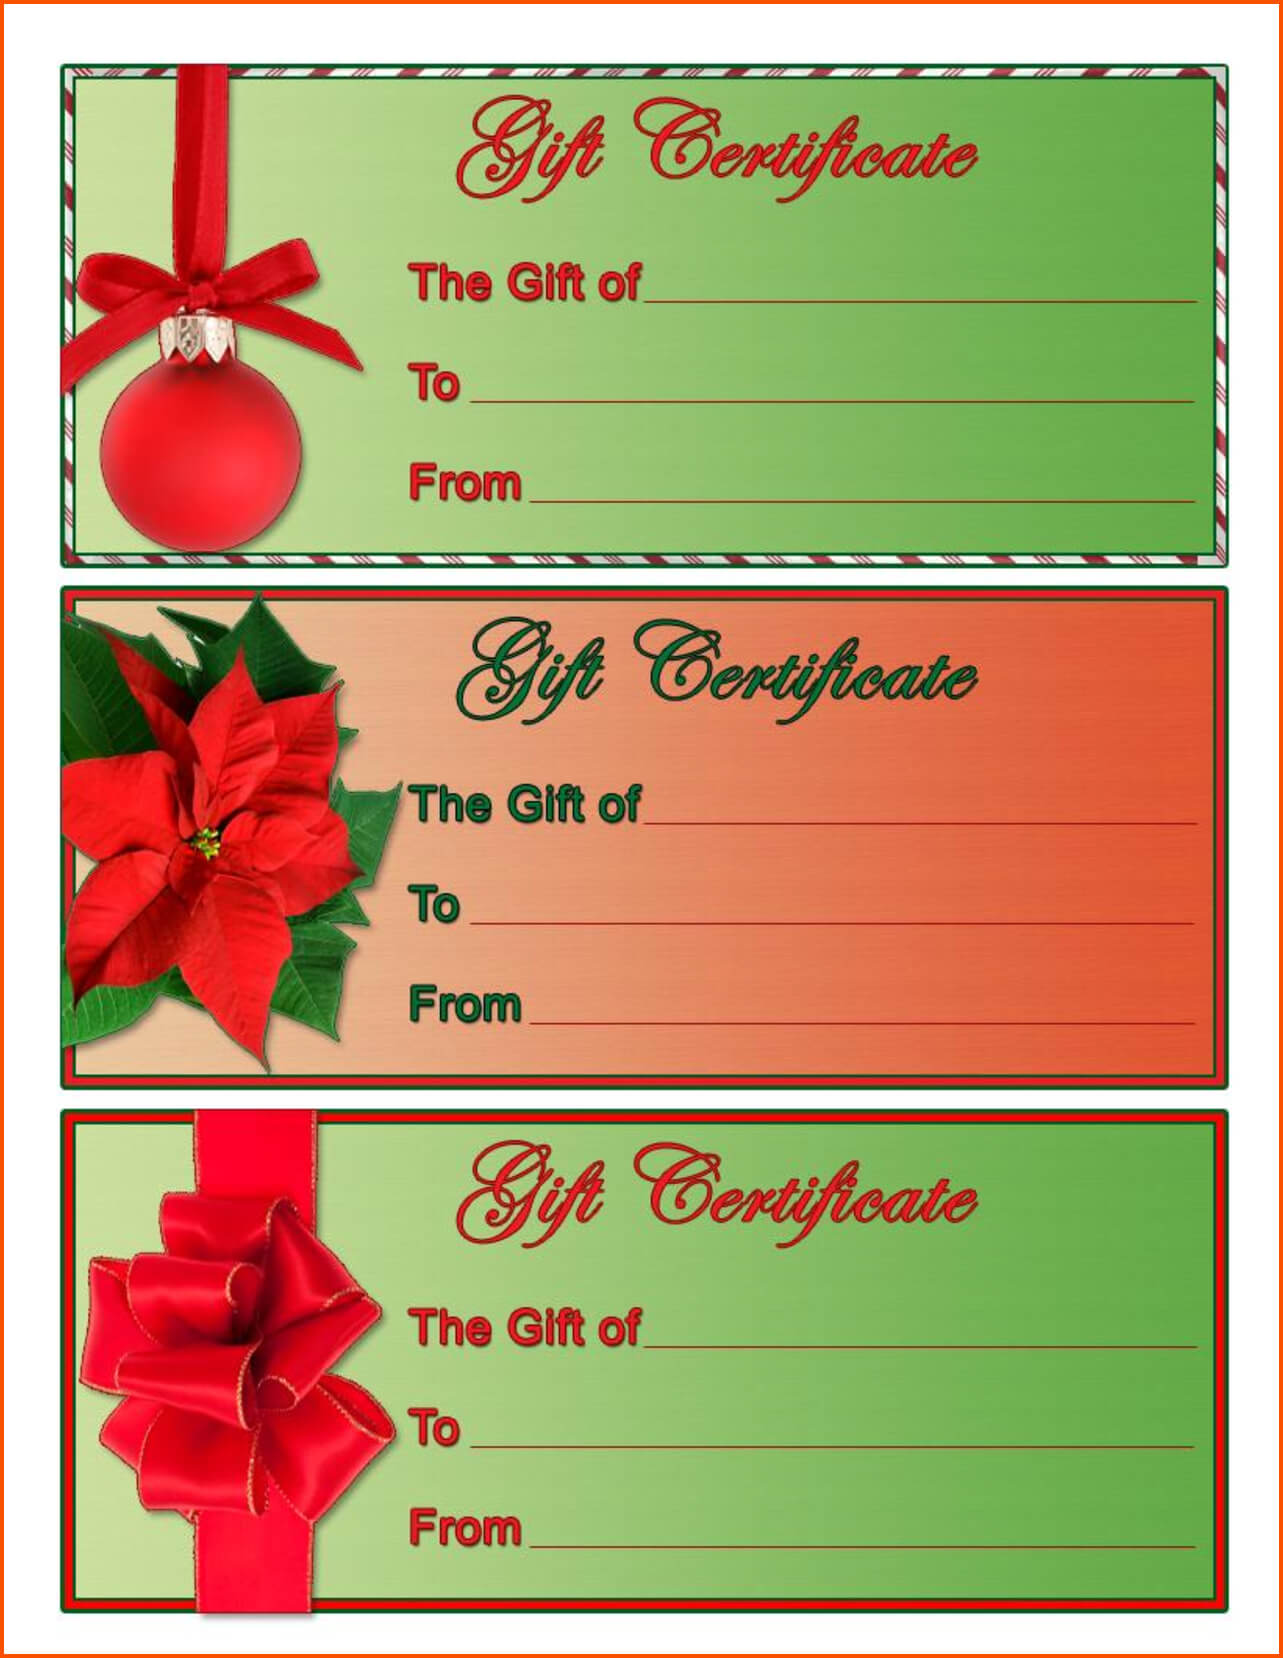 4 Christmas Gift Certificate Template Free Download | Survey Pertaining To Free Christmas Gift Certificate Templates